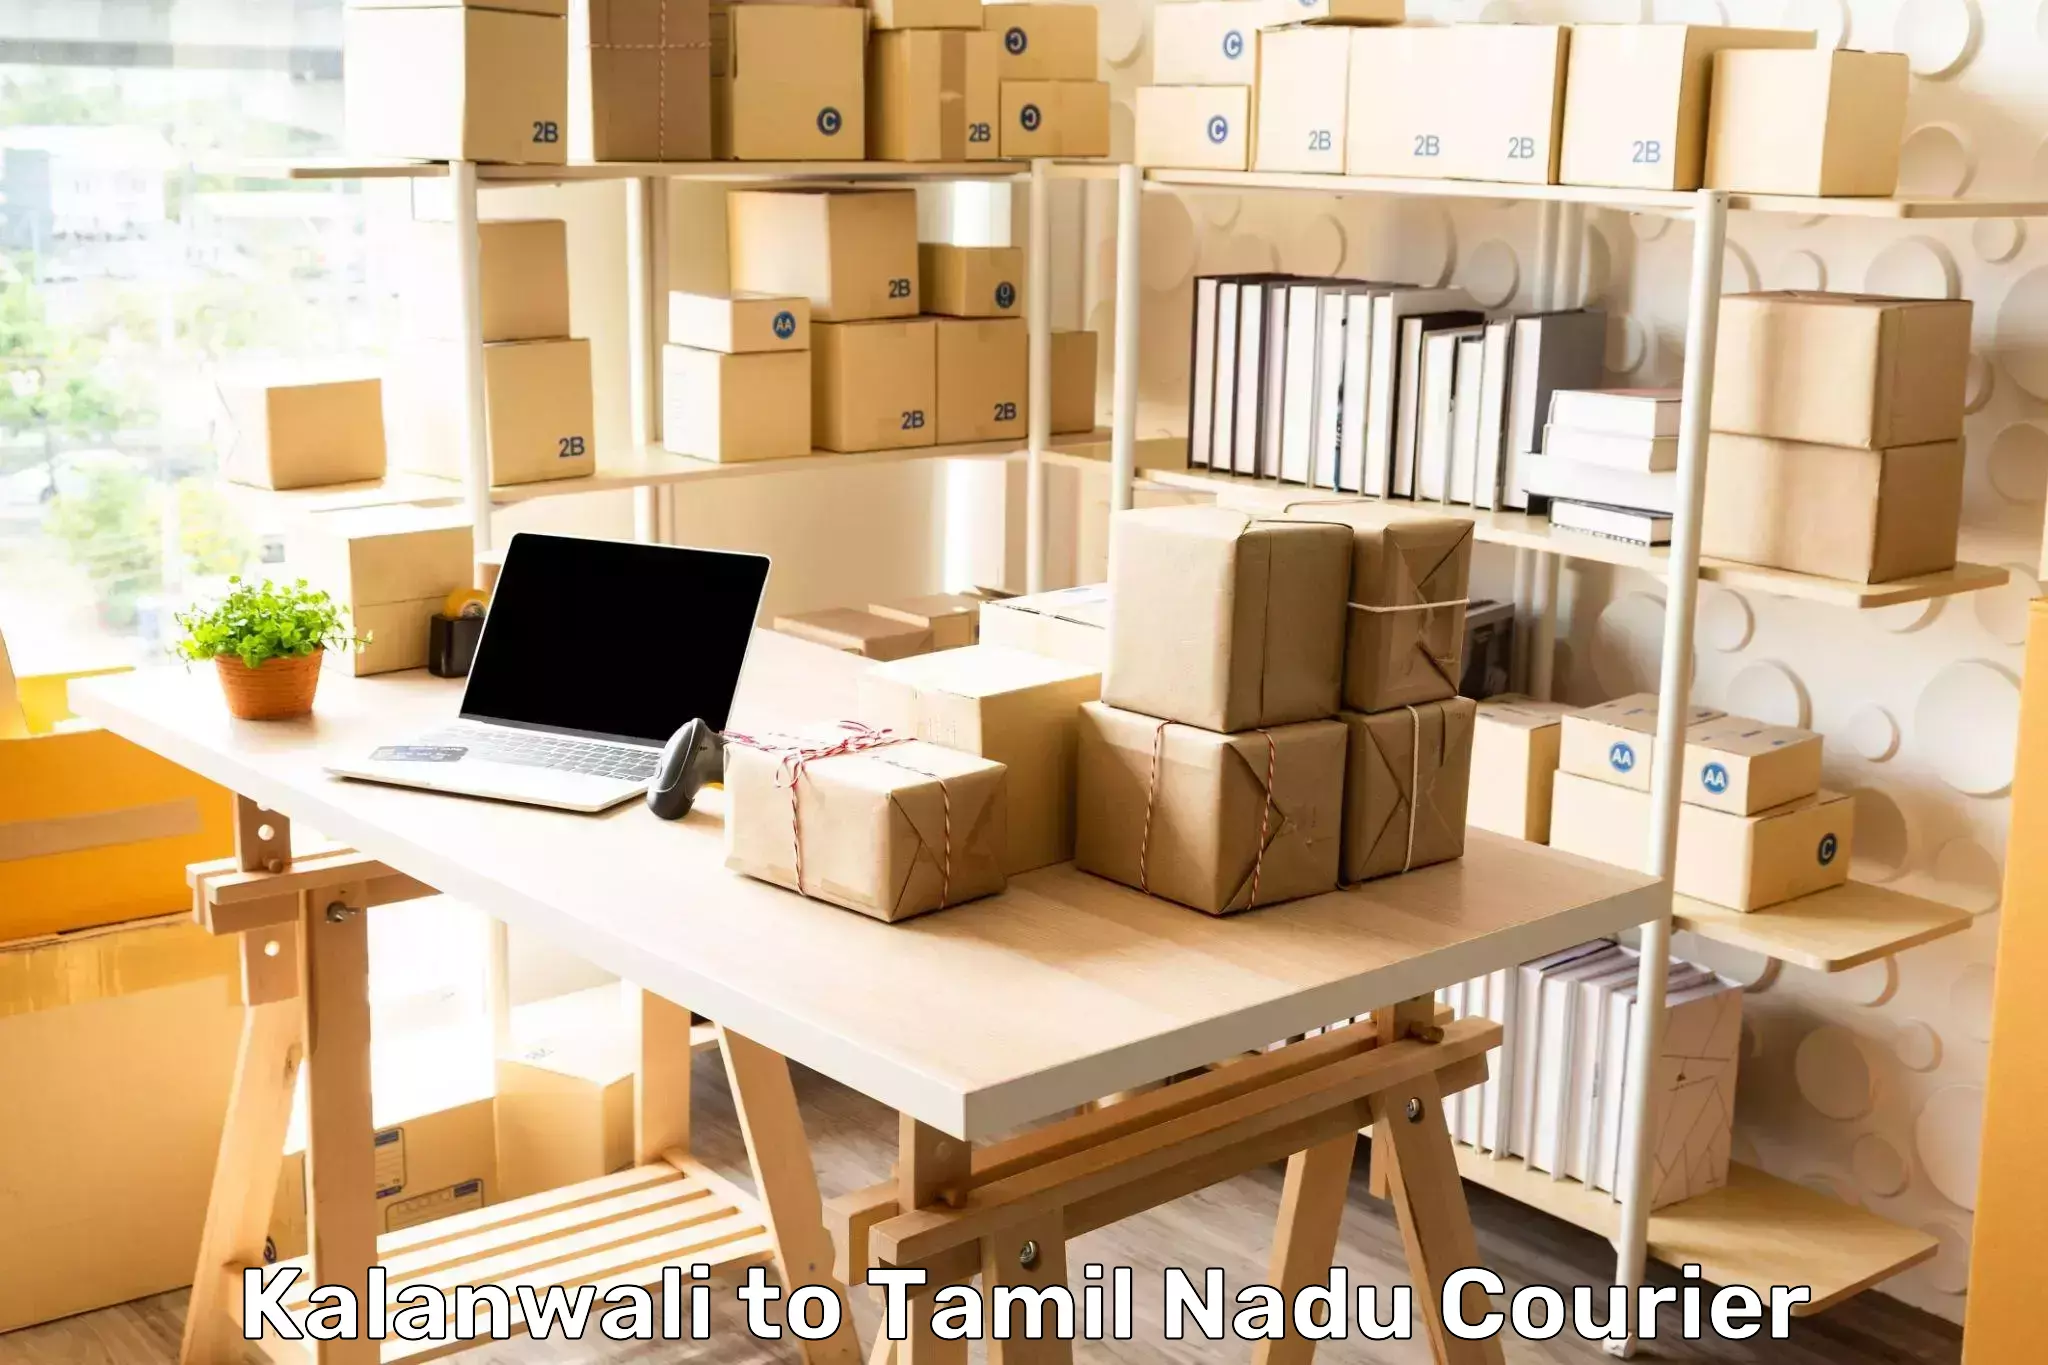 Advanced shipping services Kalanwali to Sri Ramachandra Institute of Higher Education and Research Chennai